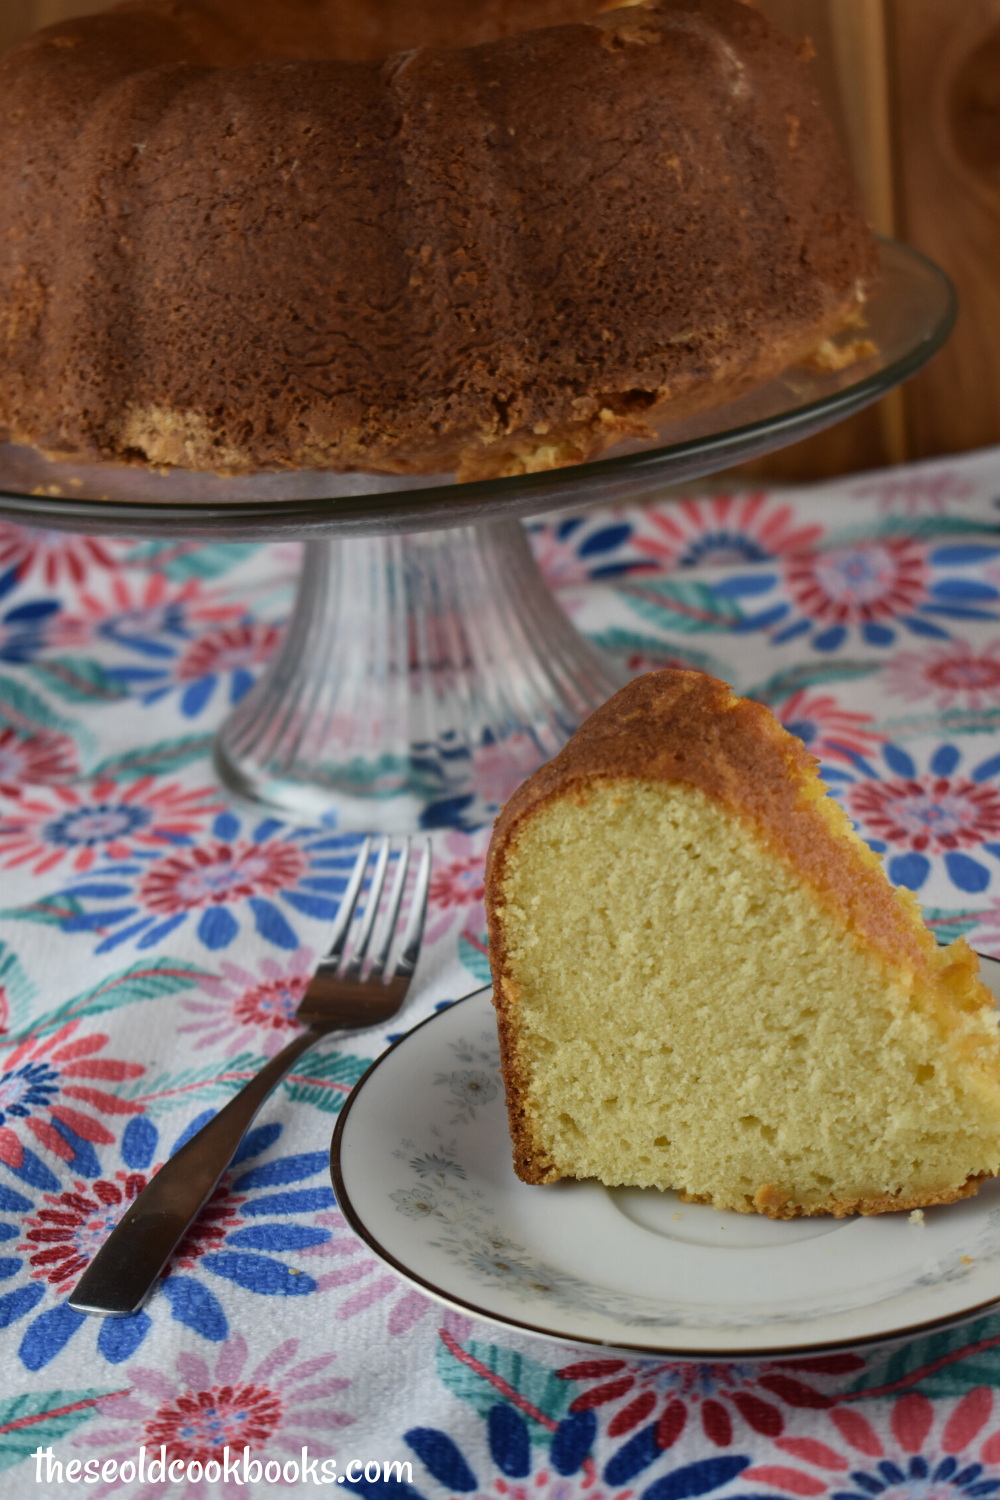 Grandma's Traditional Pound Cake is a special recipe that uses butter, margarine and Crisco for a perfectly moist and dense texture.  Amateurs and professional bakers alike will fall for this easy recipe. Serve it up for dessert or breakfast, it will be a favorite for all.